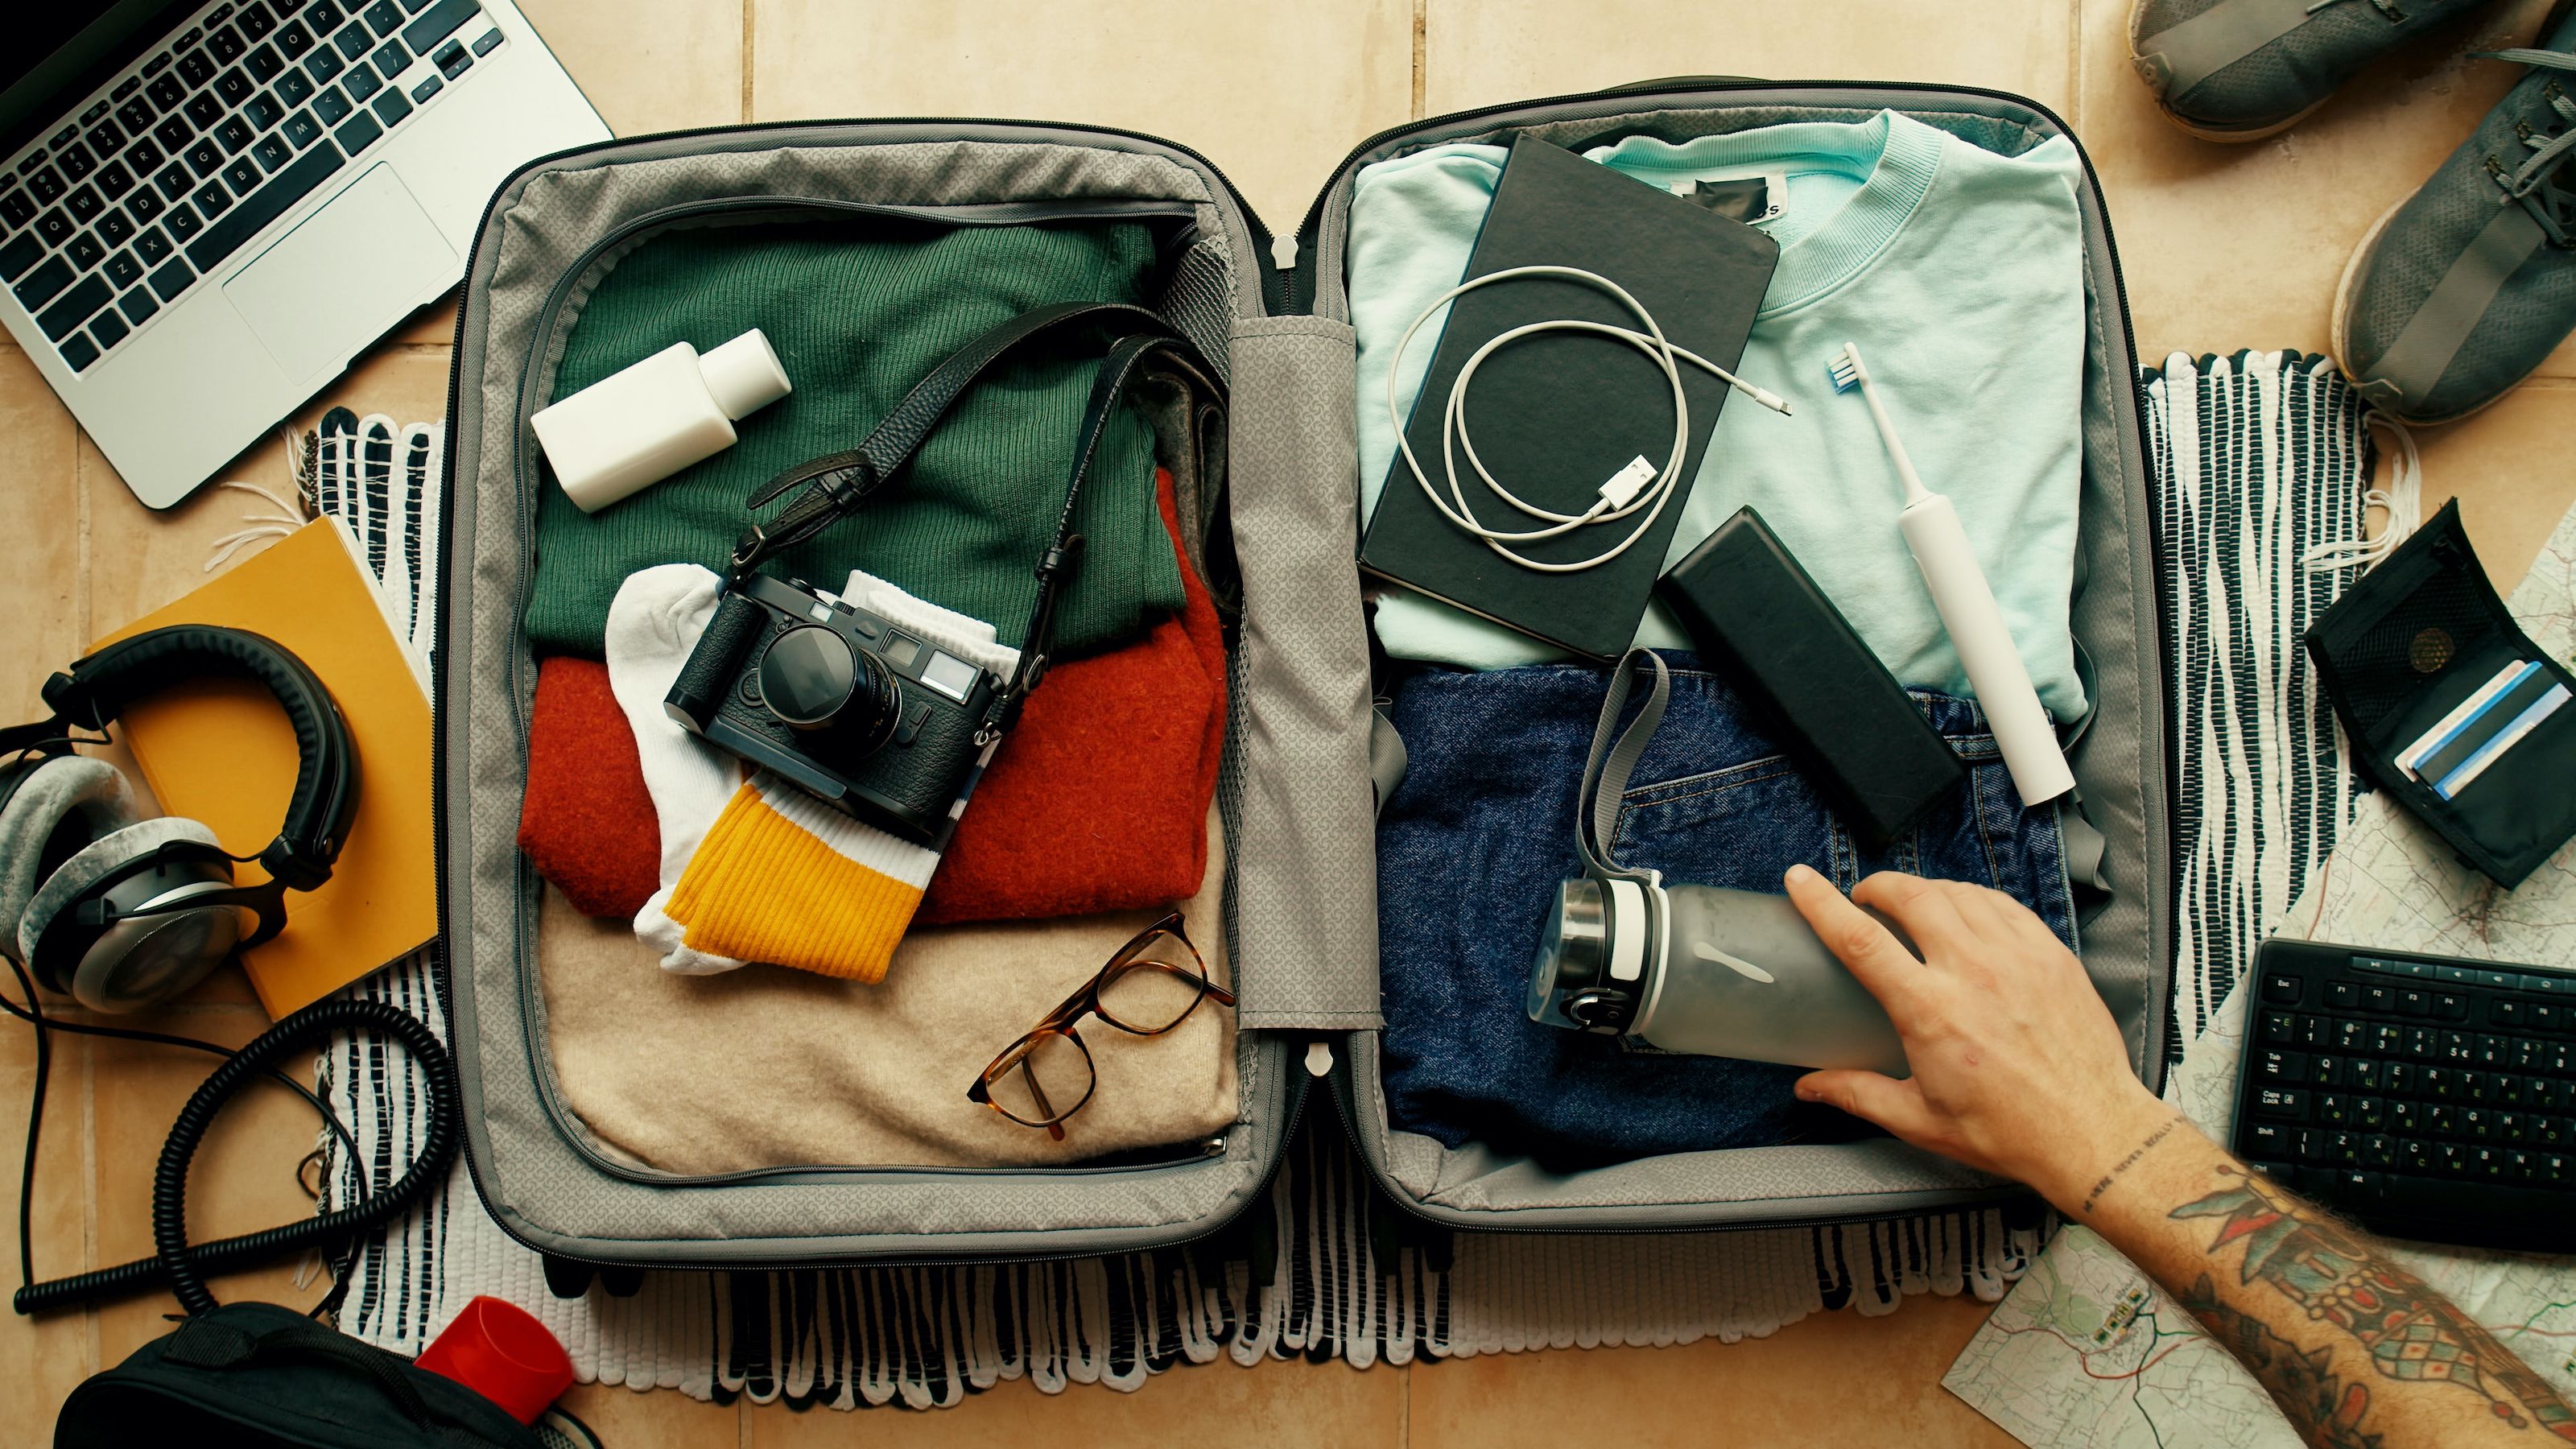 https://media.cnn.com/api/v1/images/stellar/prod/underscored-how-to-pack-a-suitcase-lead-packing.jpg?q=h_1800,w_3200,x_0,y_0